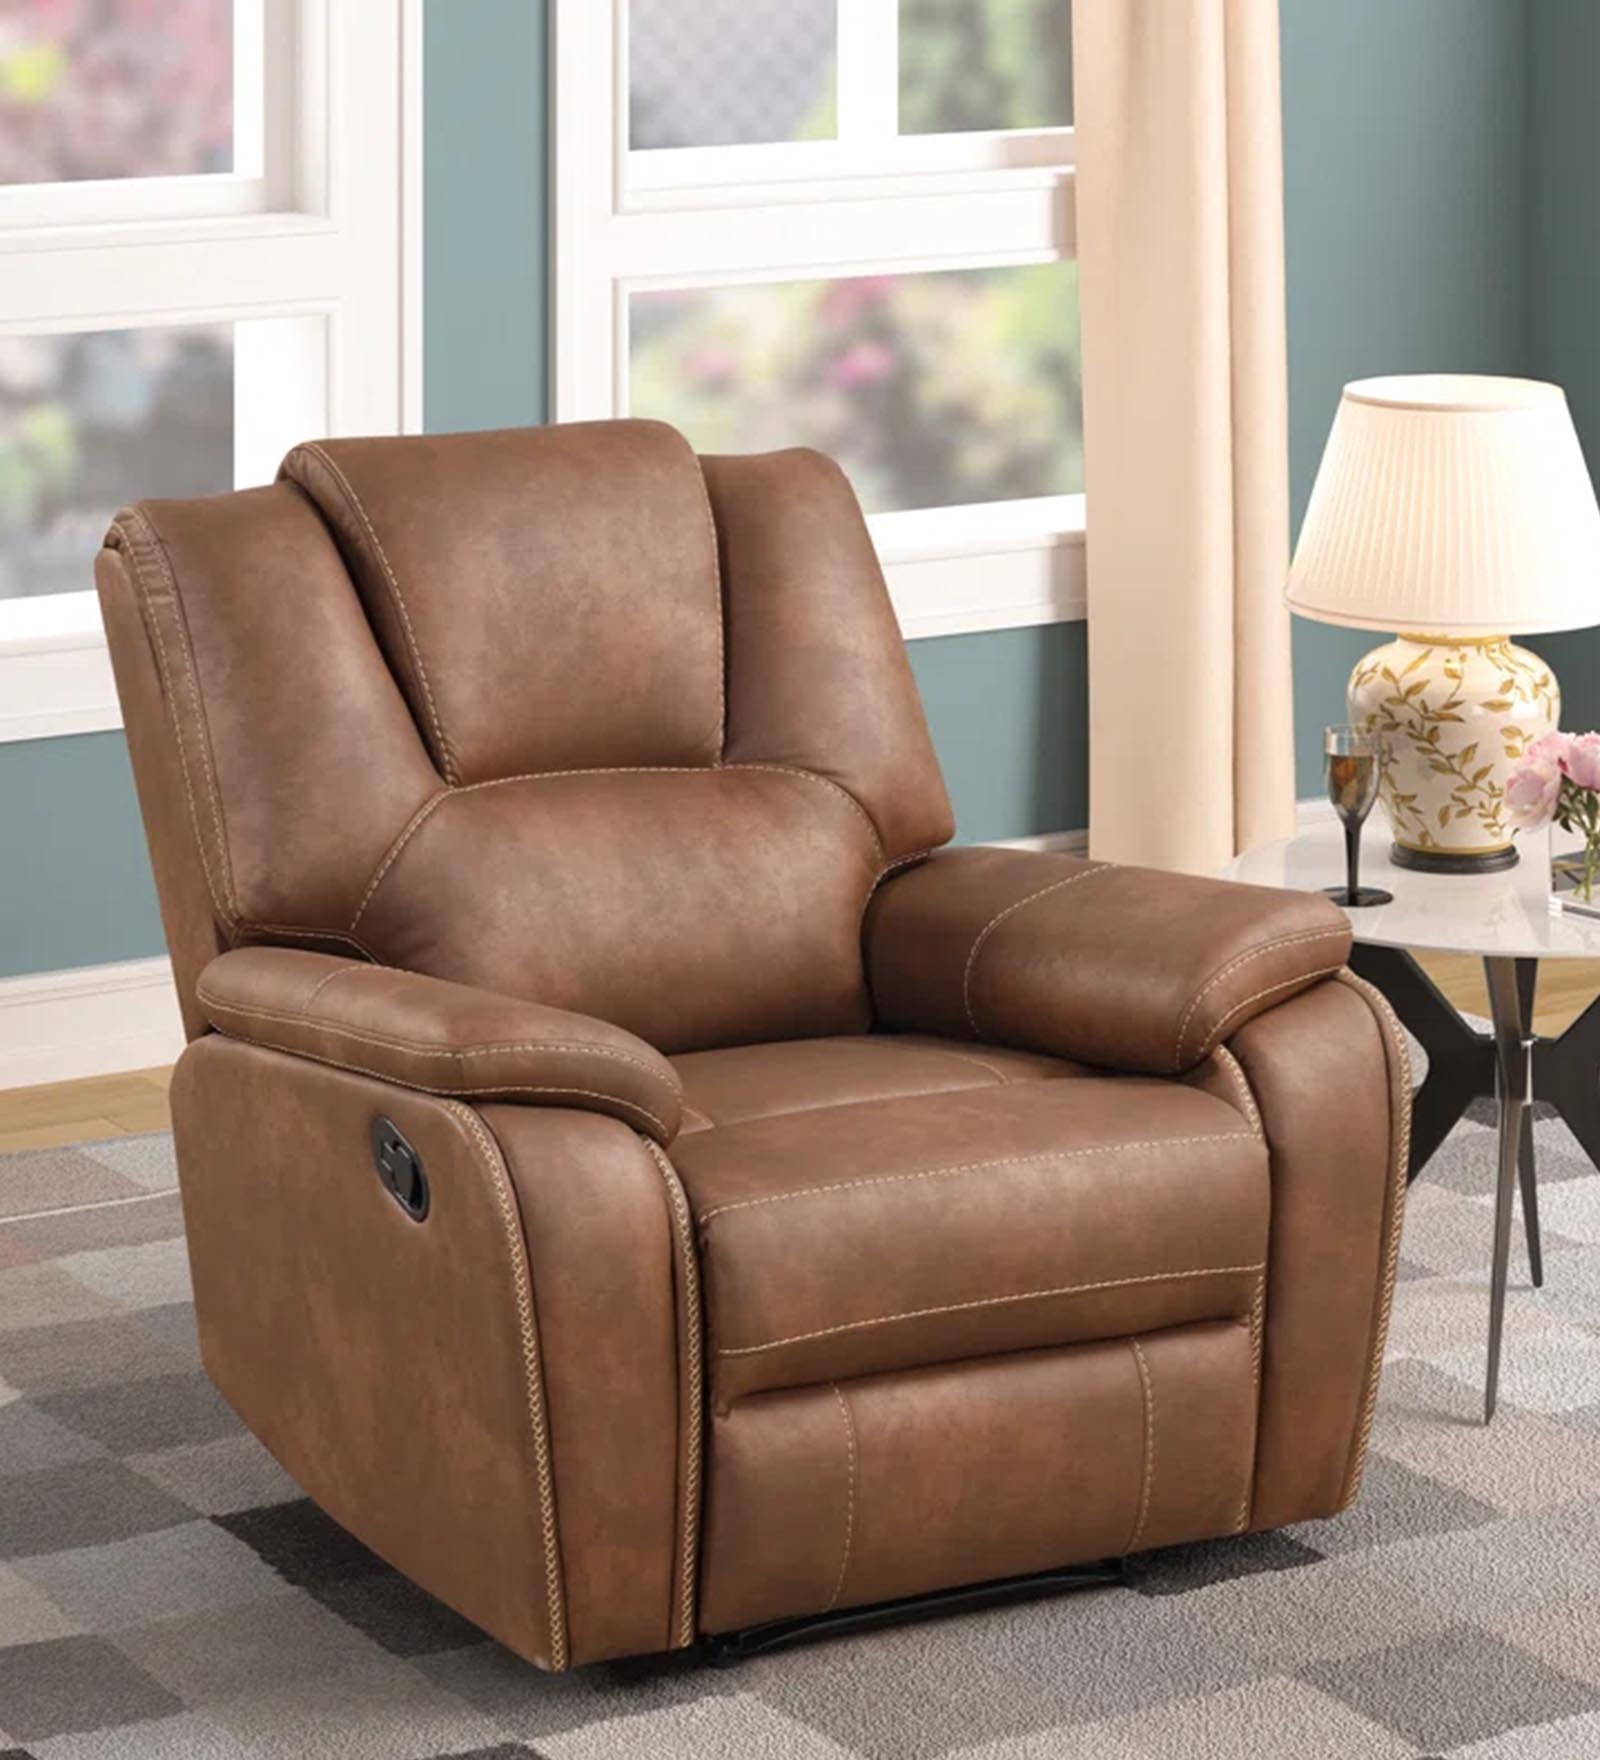 Dolpin Leather Manual 1 Seater Recliner In Clay-Brown Leather Finish